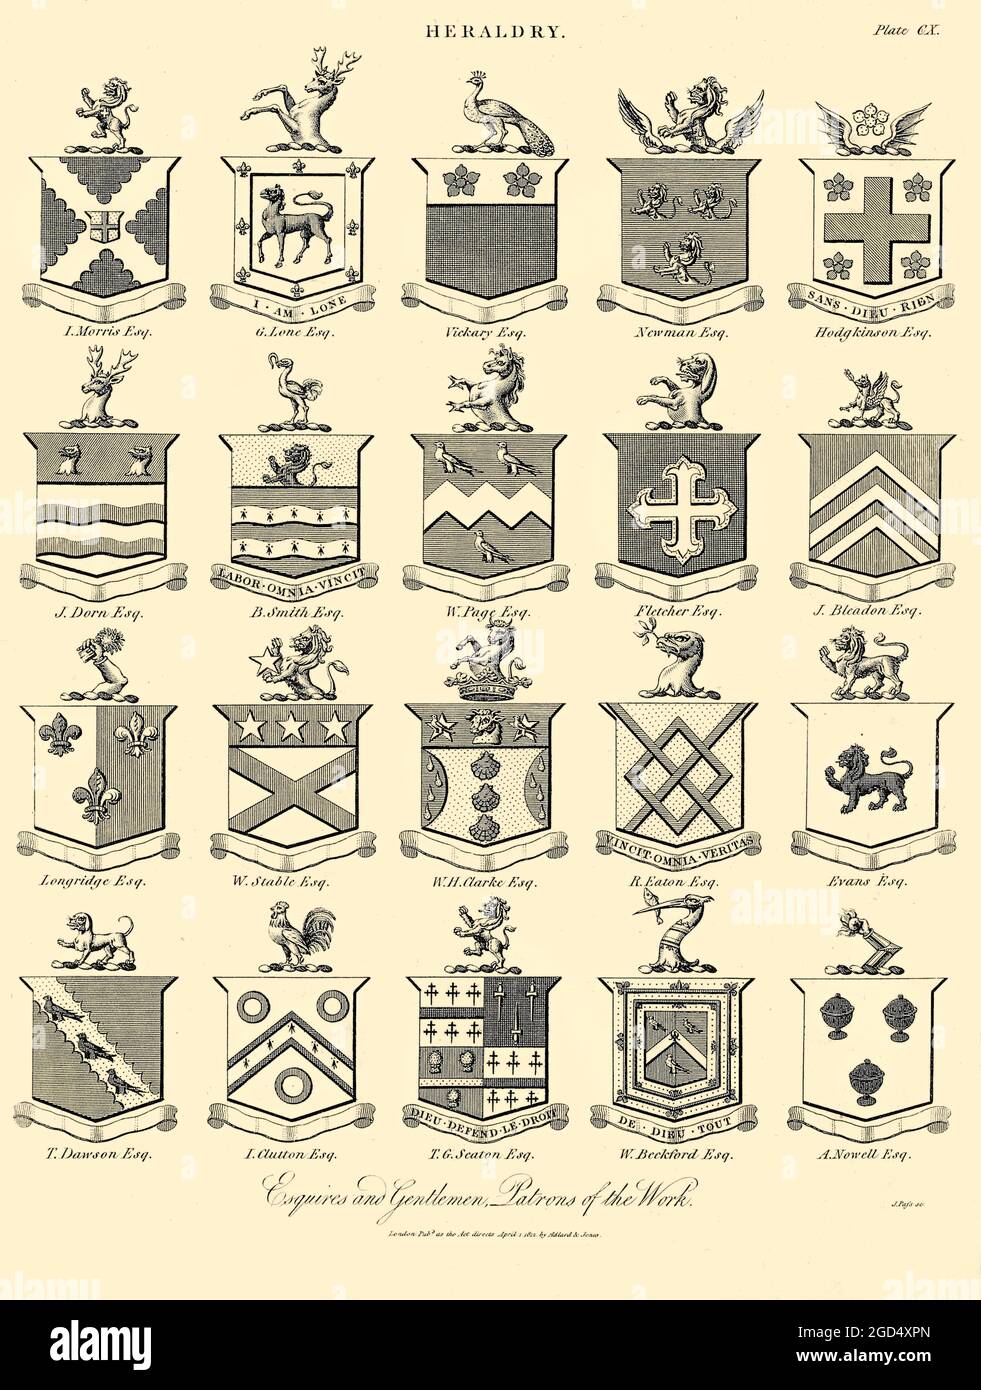 Esquires and Gentlemen Heraldry is a discipline relating to the design, display and study of armorial bearings (known as armory), as well as related disciplines, such as vexillology, together with the study of ceremony, rank and pedigree. Armory, the best-known branch of heraldry, concerns the design and transmission of the heraldic achievement. The achievement, or armorial bearings usually includes a coat of arms on a shield, helmet and crest, together with any accompanying devices, such as supporters, badges, heraldic banners and mottoes. Copperplate engraving From the Encyclopaedia Londinen Stock Photo